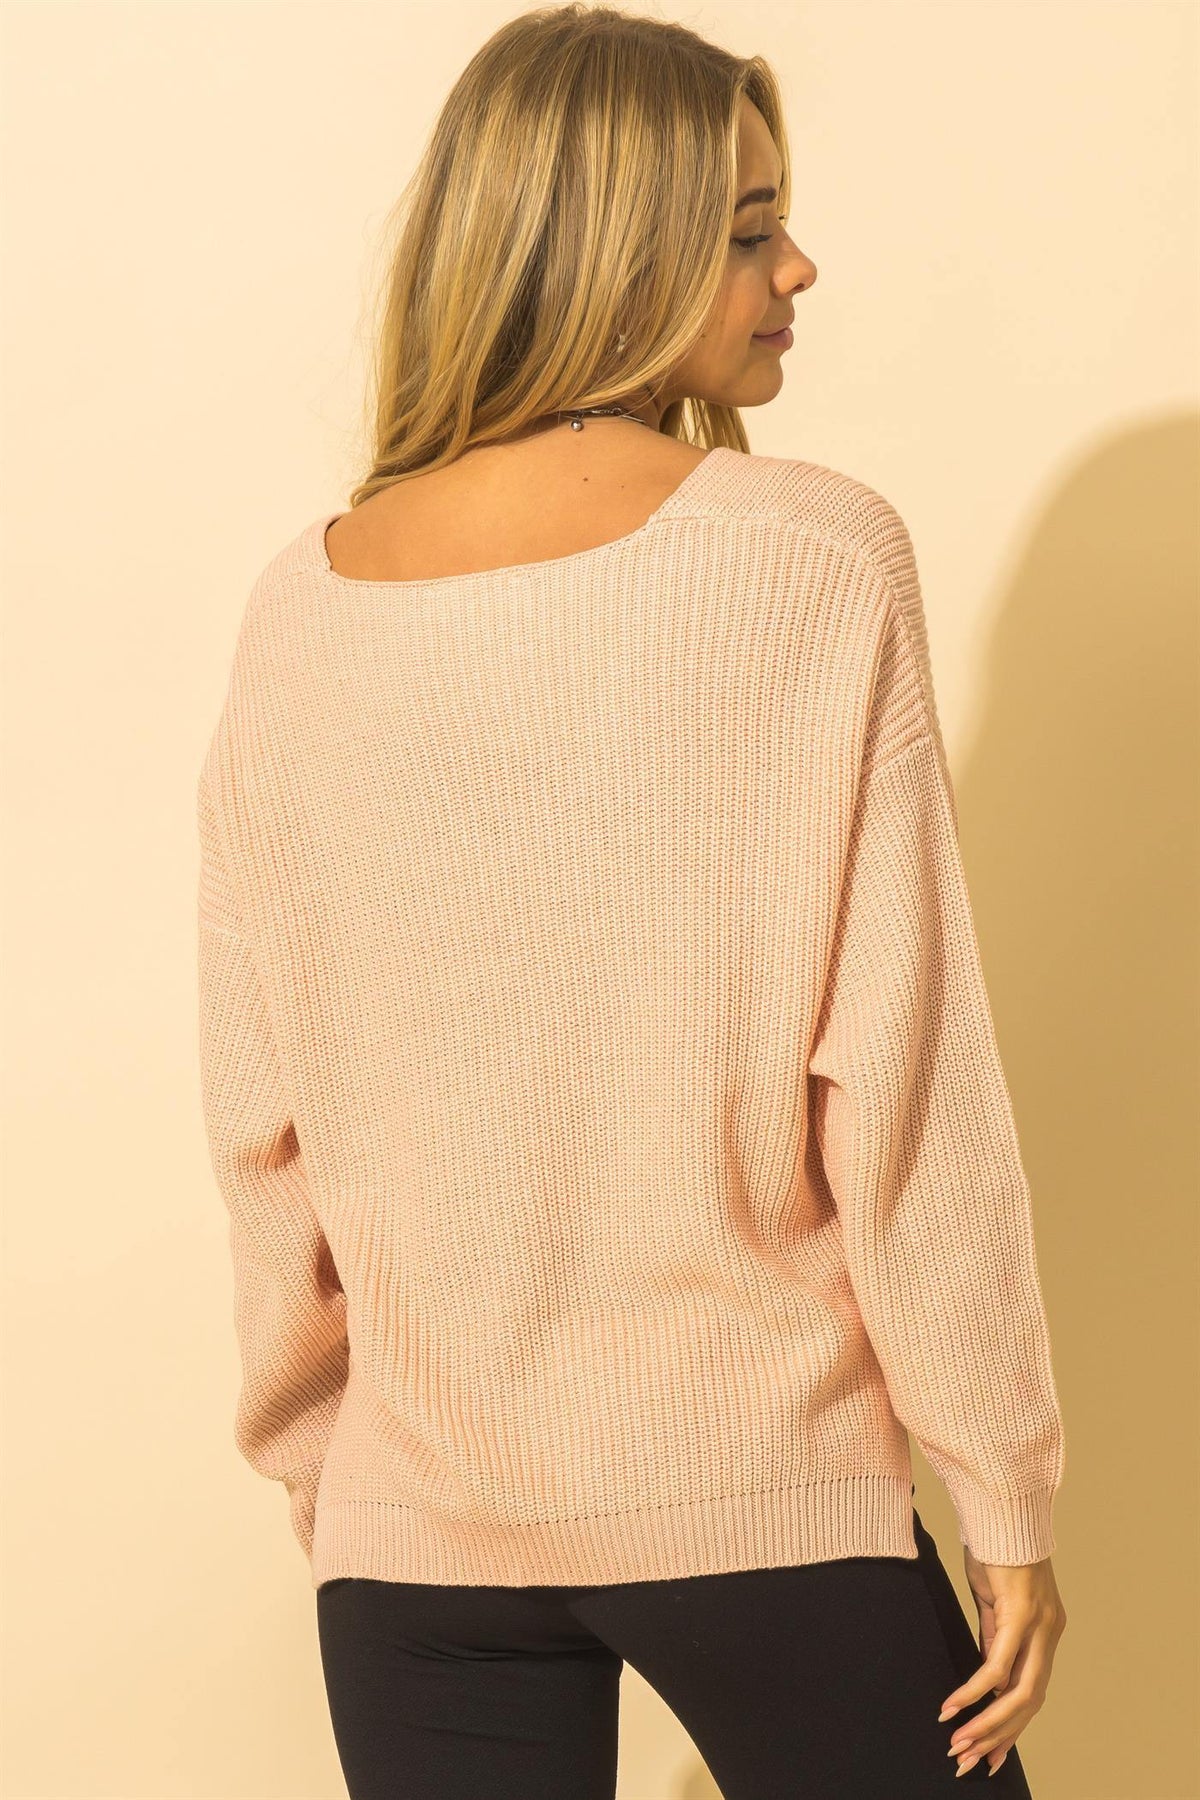 After Sunset Sweater - Pink